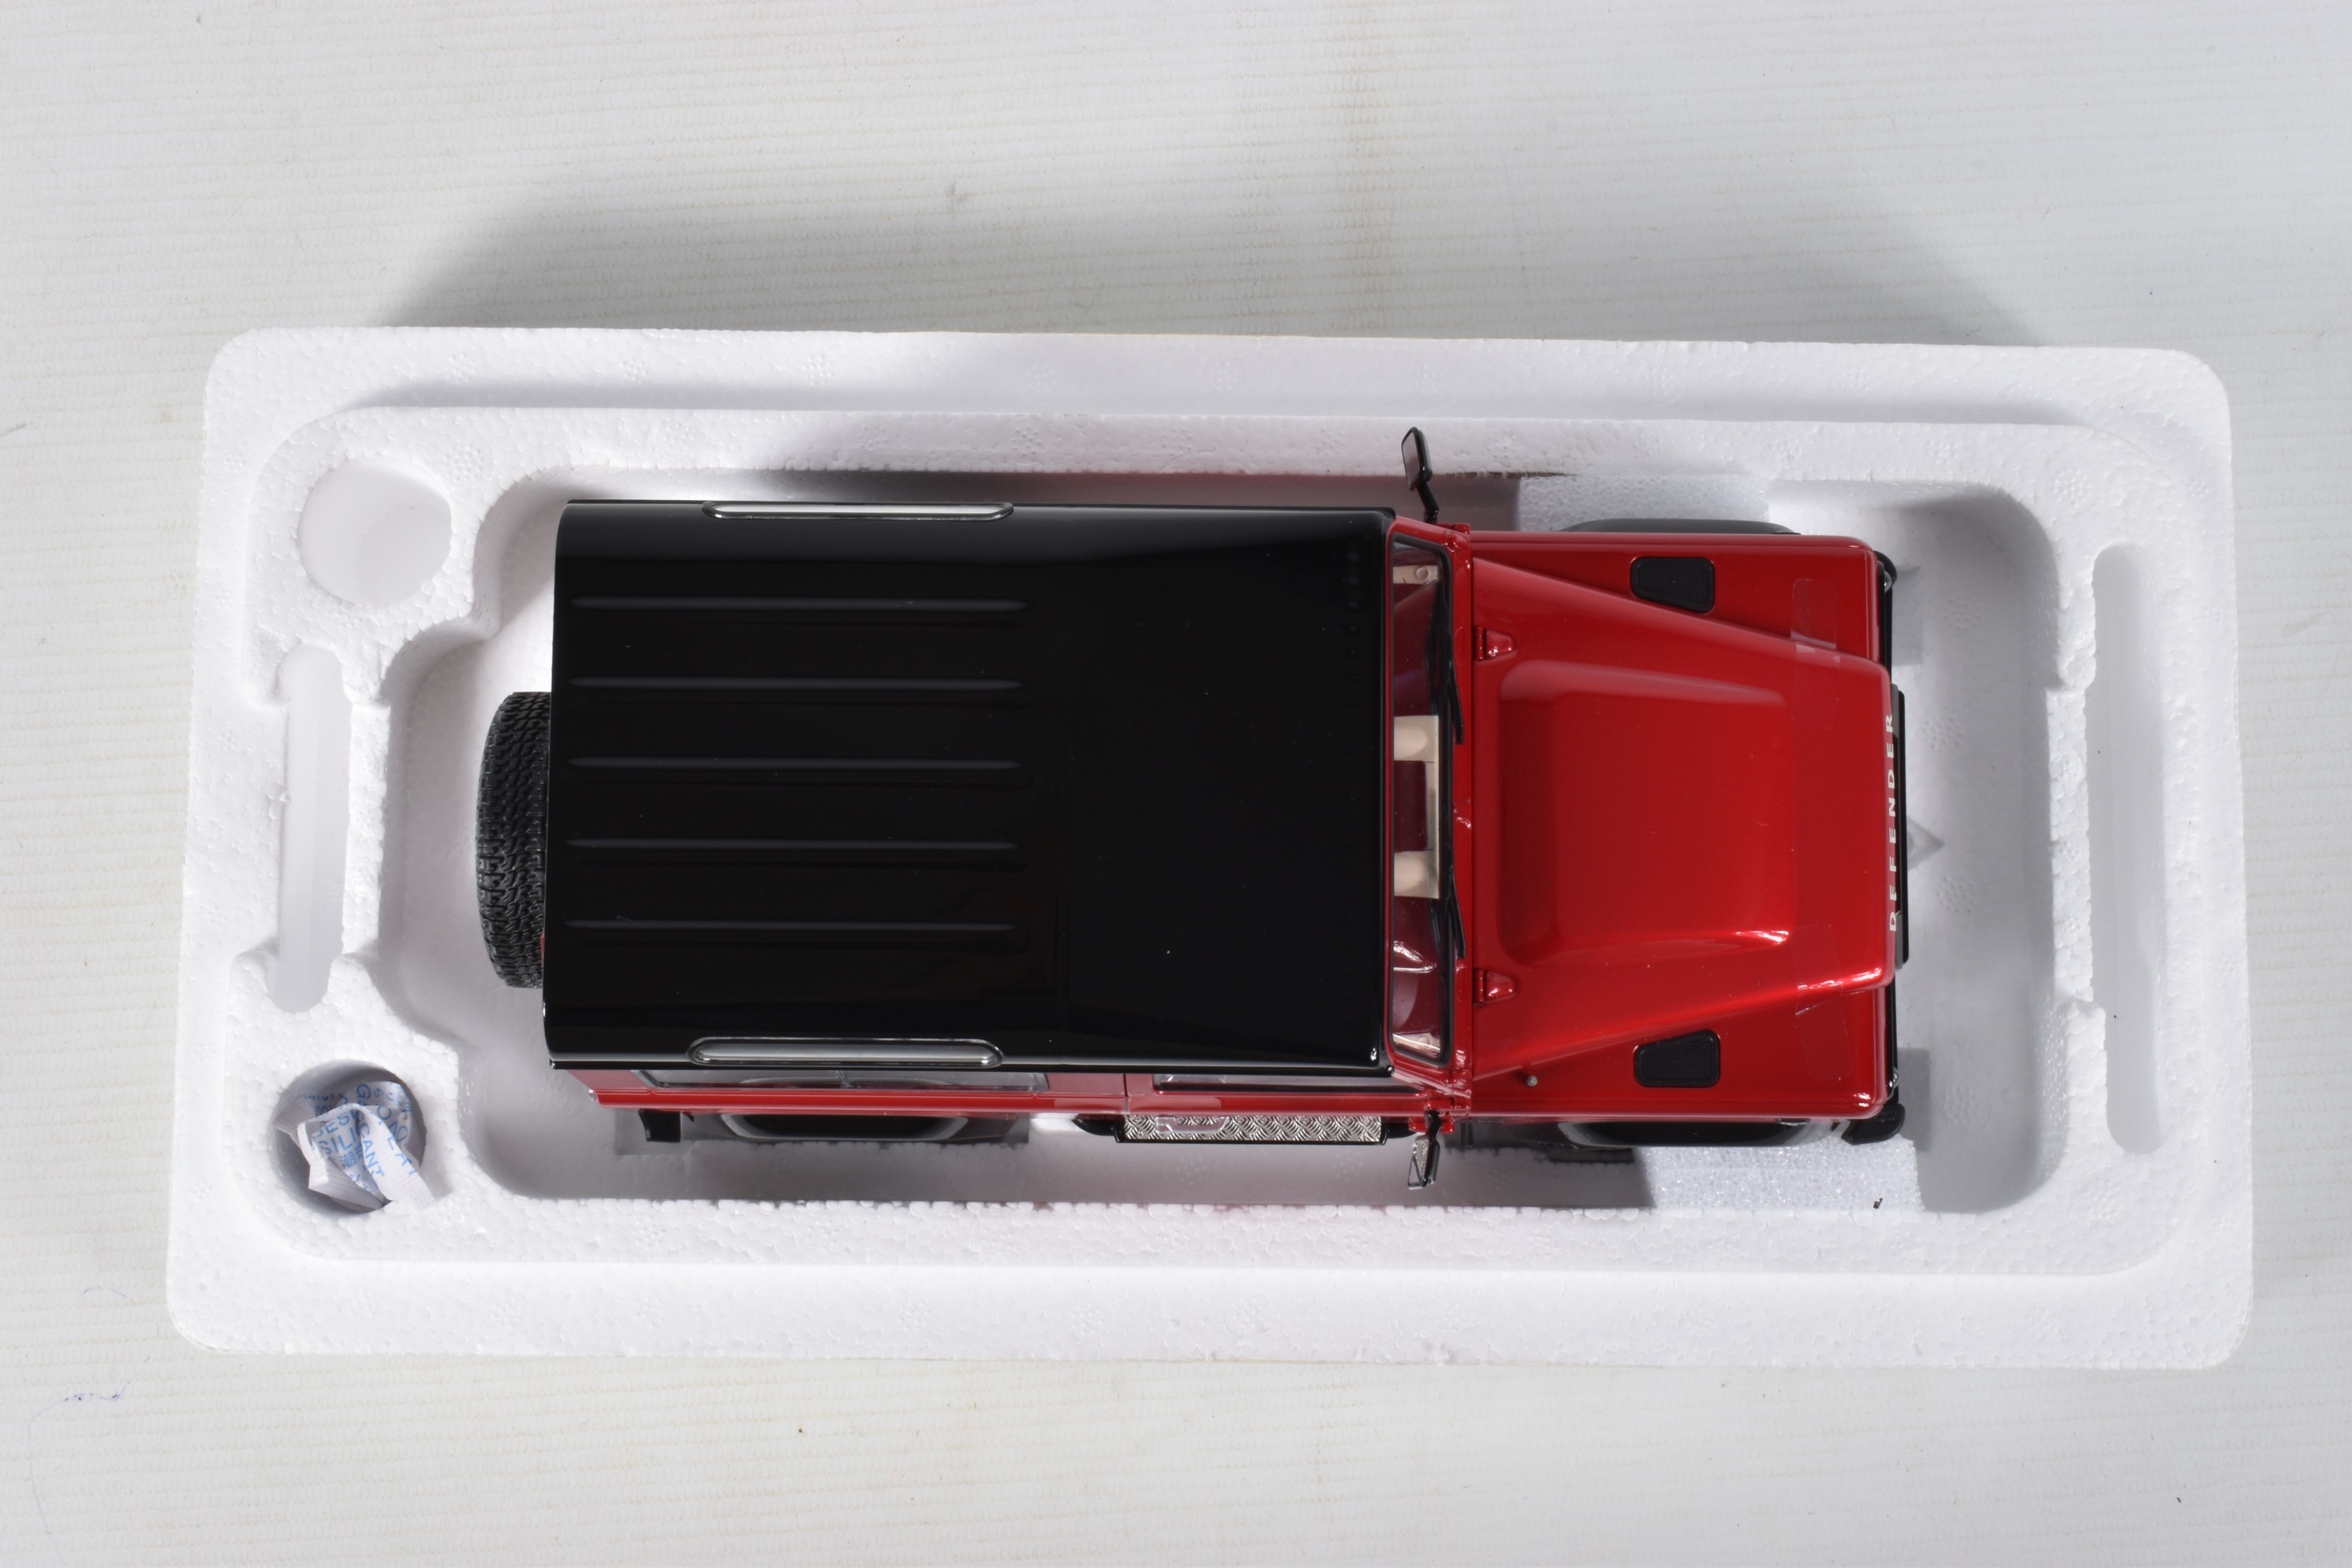 A BOXED ALMOST REAL LAND ROVER DEFENDER 90 SCALE 1:18 MODEL VEHICLE, numbered 810215, painted red - Image 9 of 9